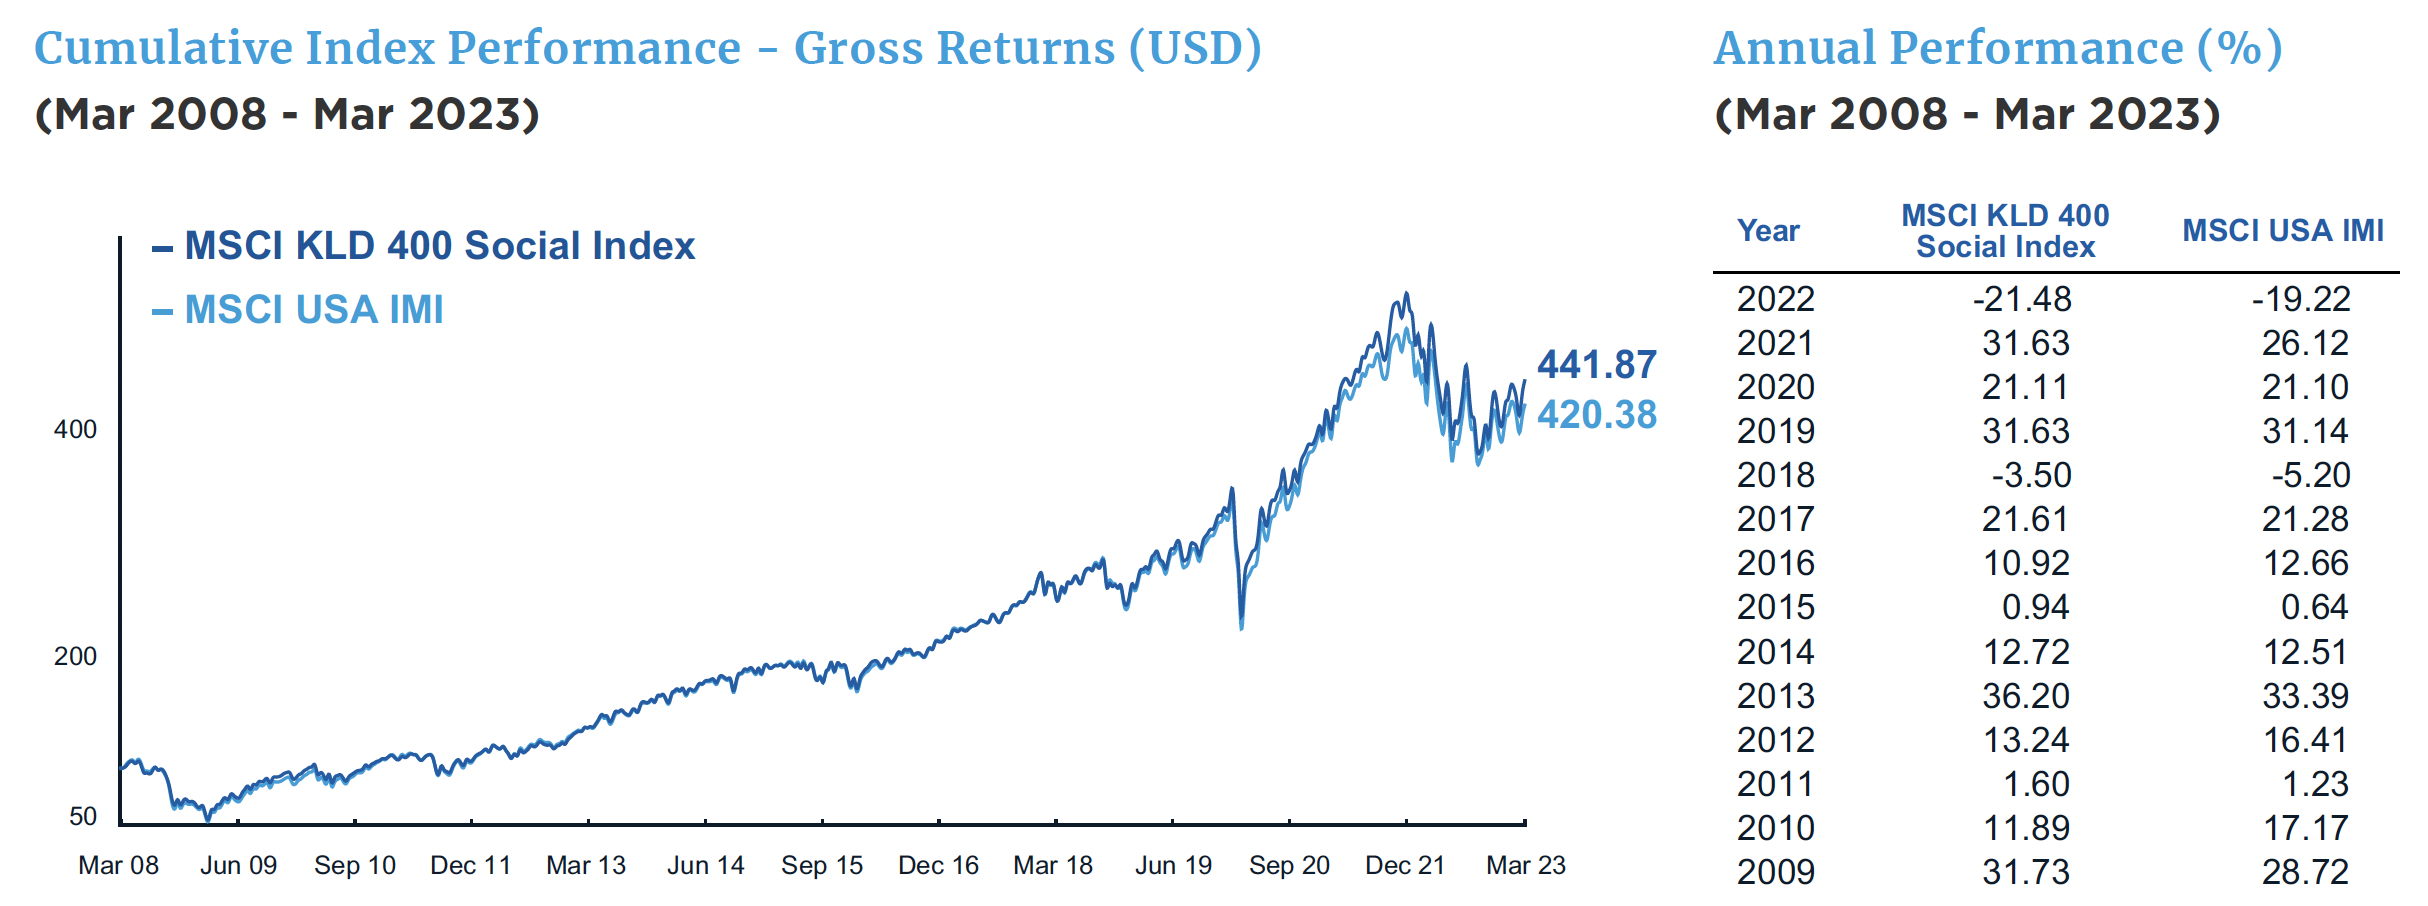 Cumulative Index Performance - Gross Returns (USD) and annual perfomance